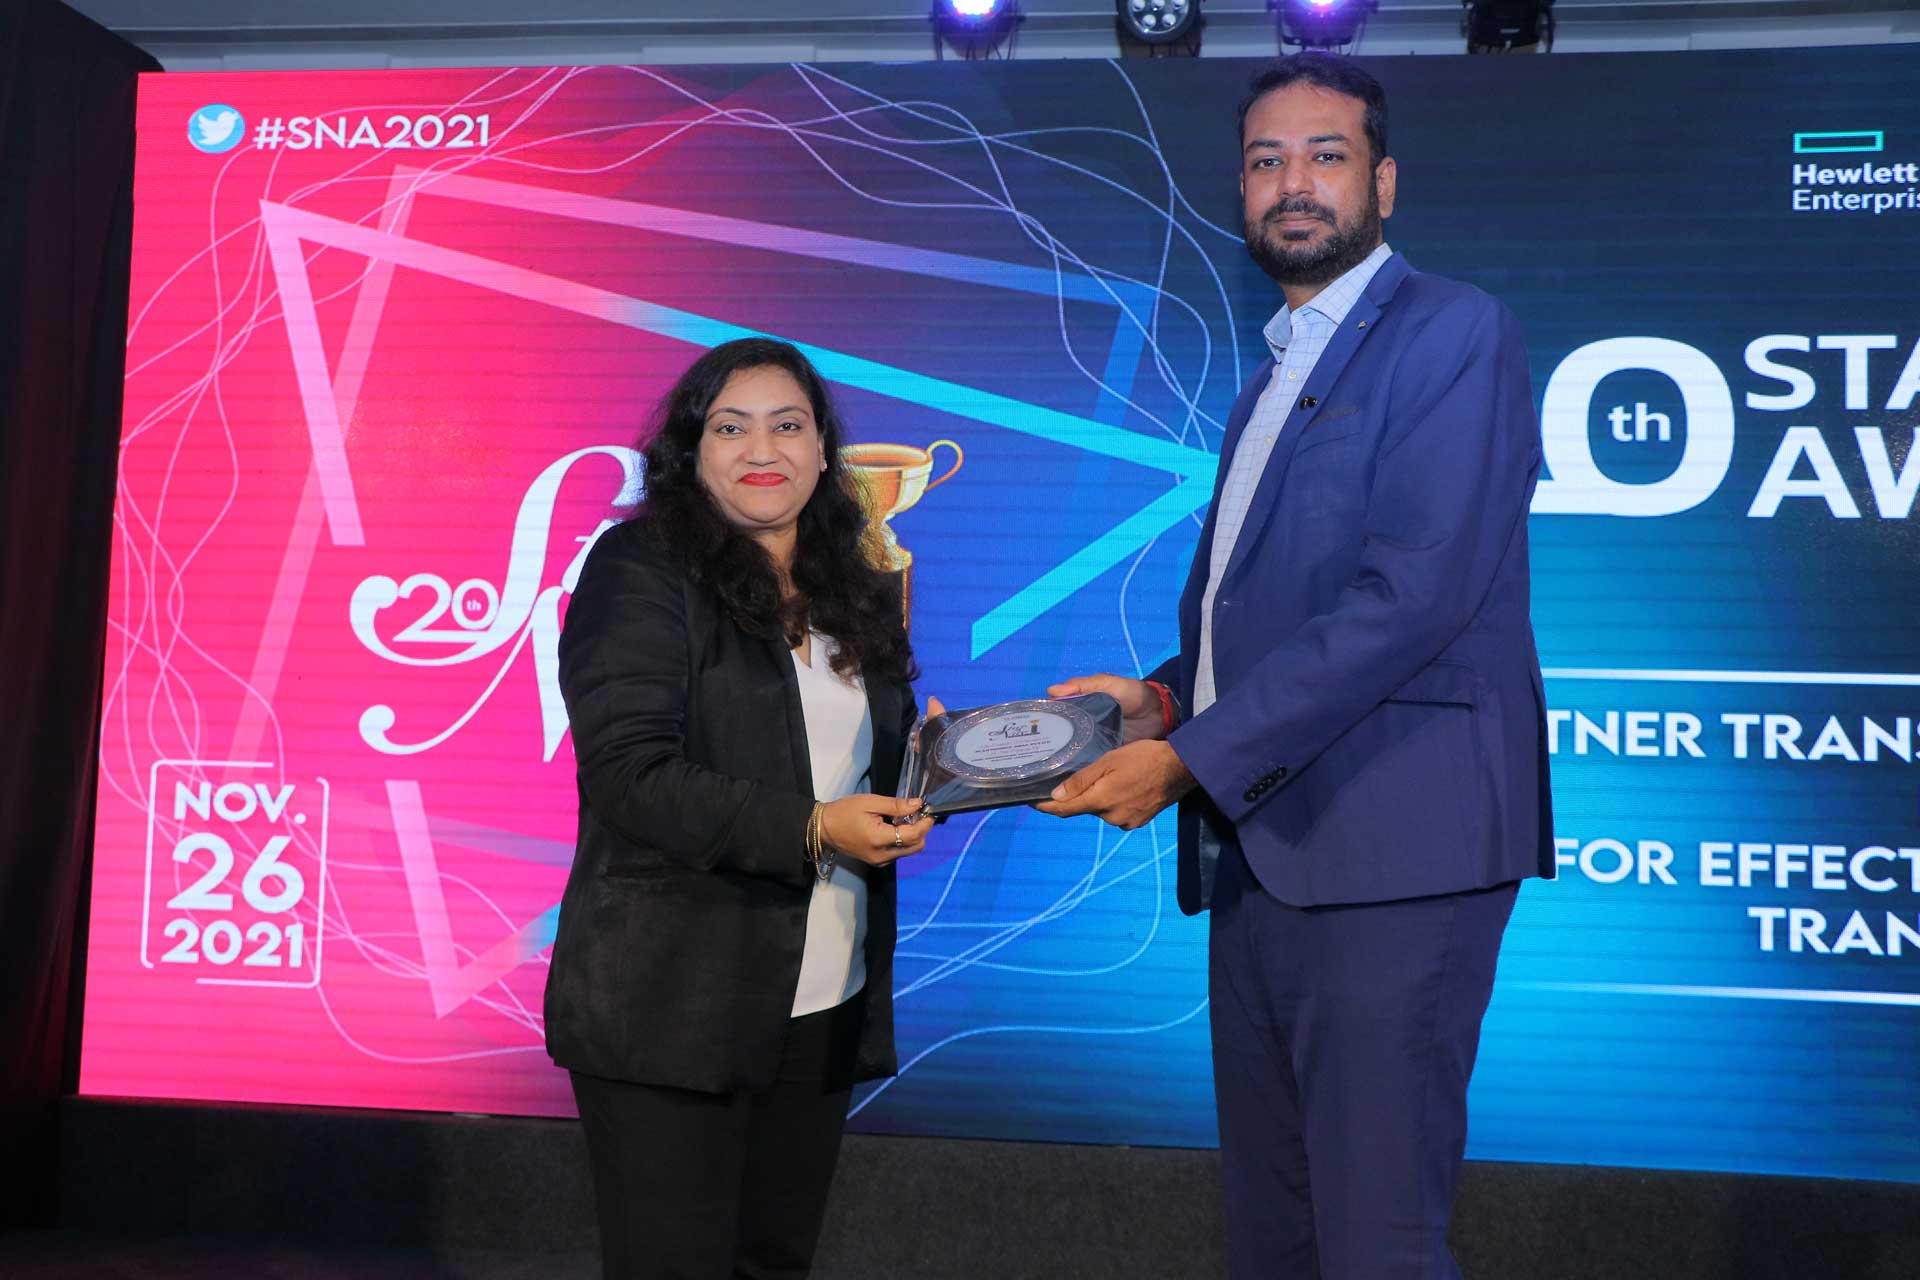 Best Video Conferencing Infrastructure Solution Company Award goes to POLY at 20th Star Nite Awards 2021